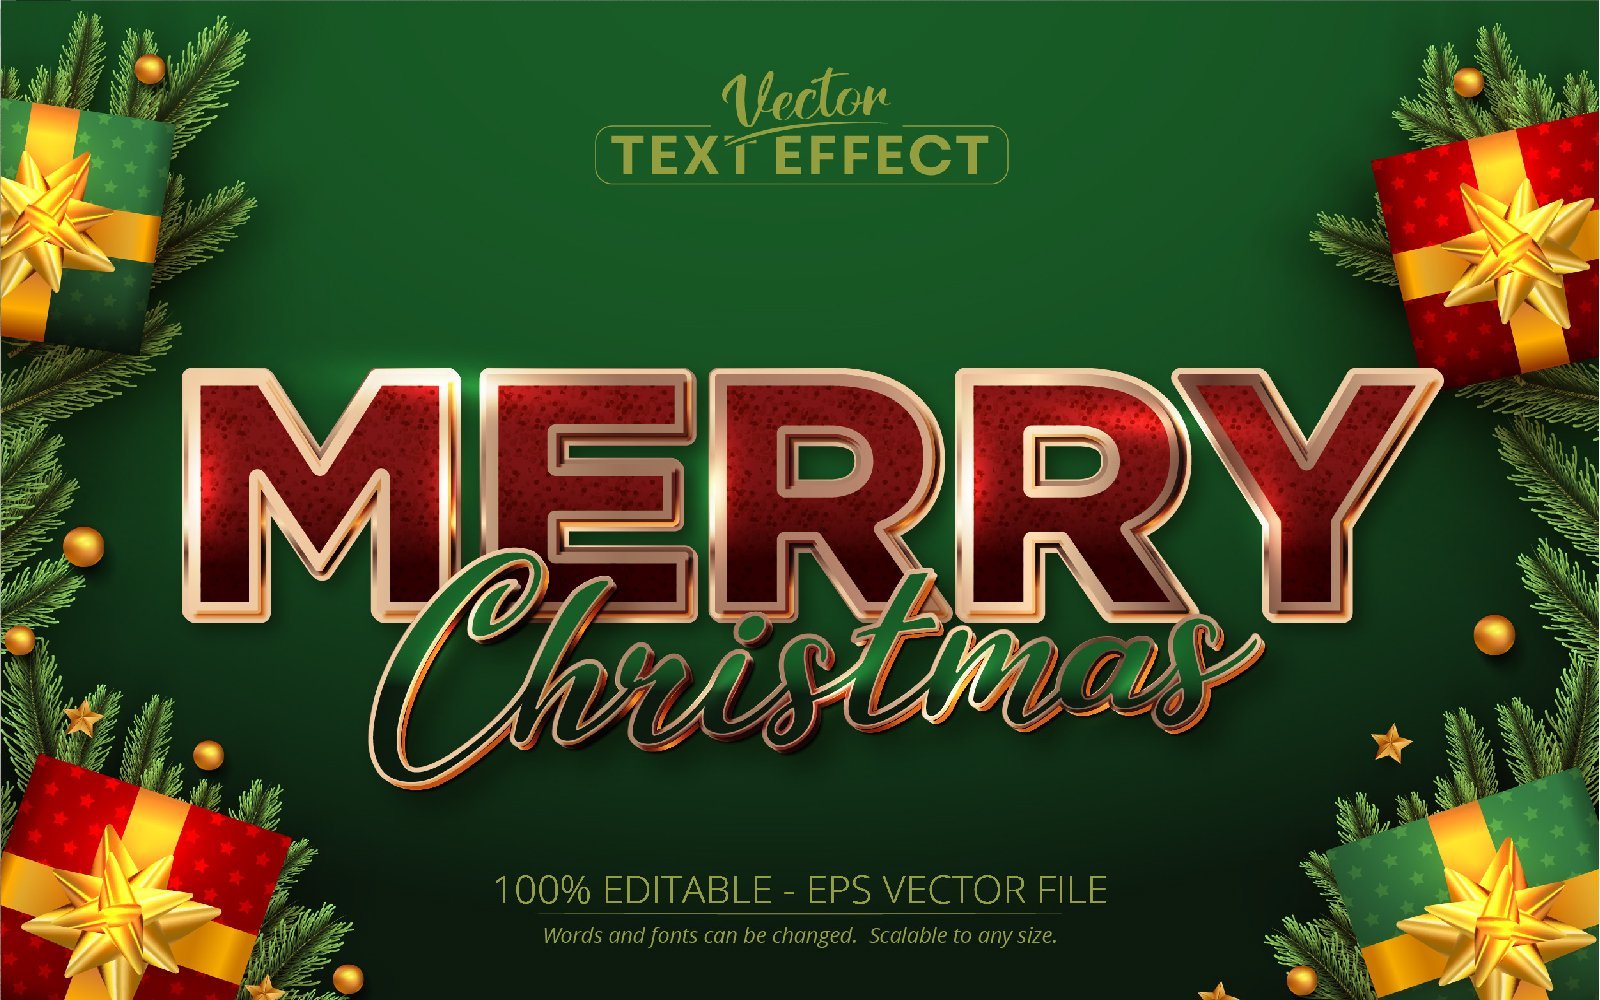 Merry Christmas - Editable Text Effect, Green And Gold Font Style, Graphics Illustration